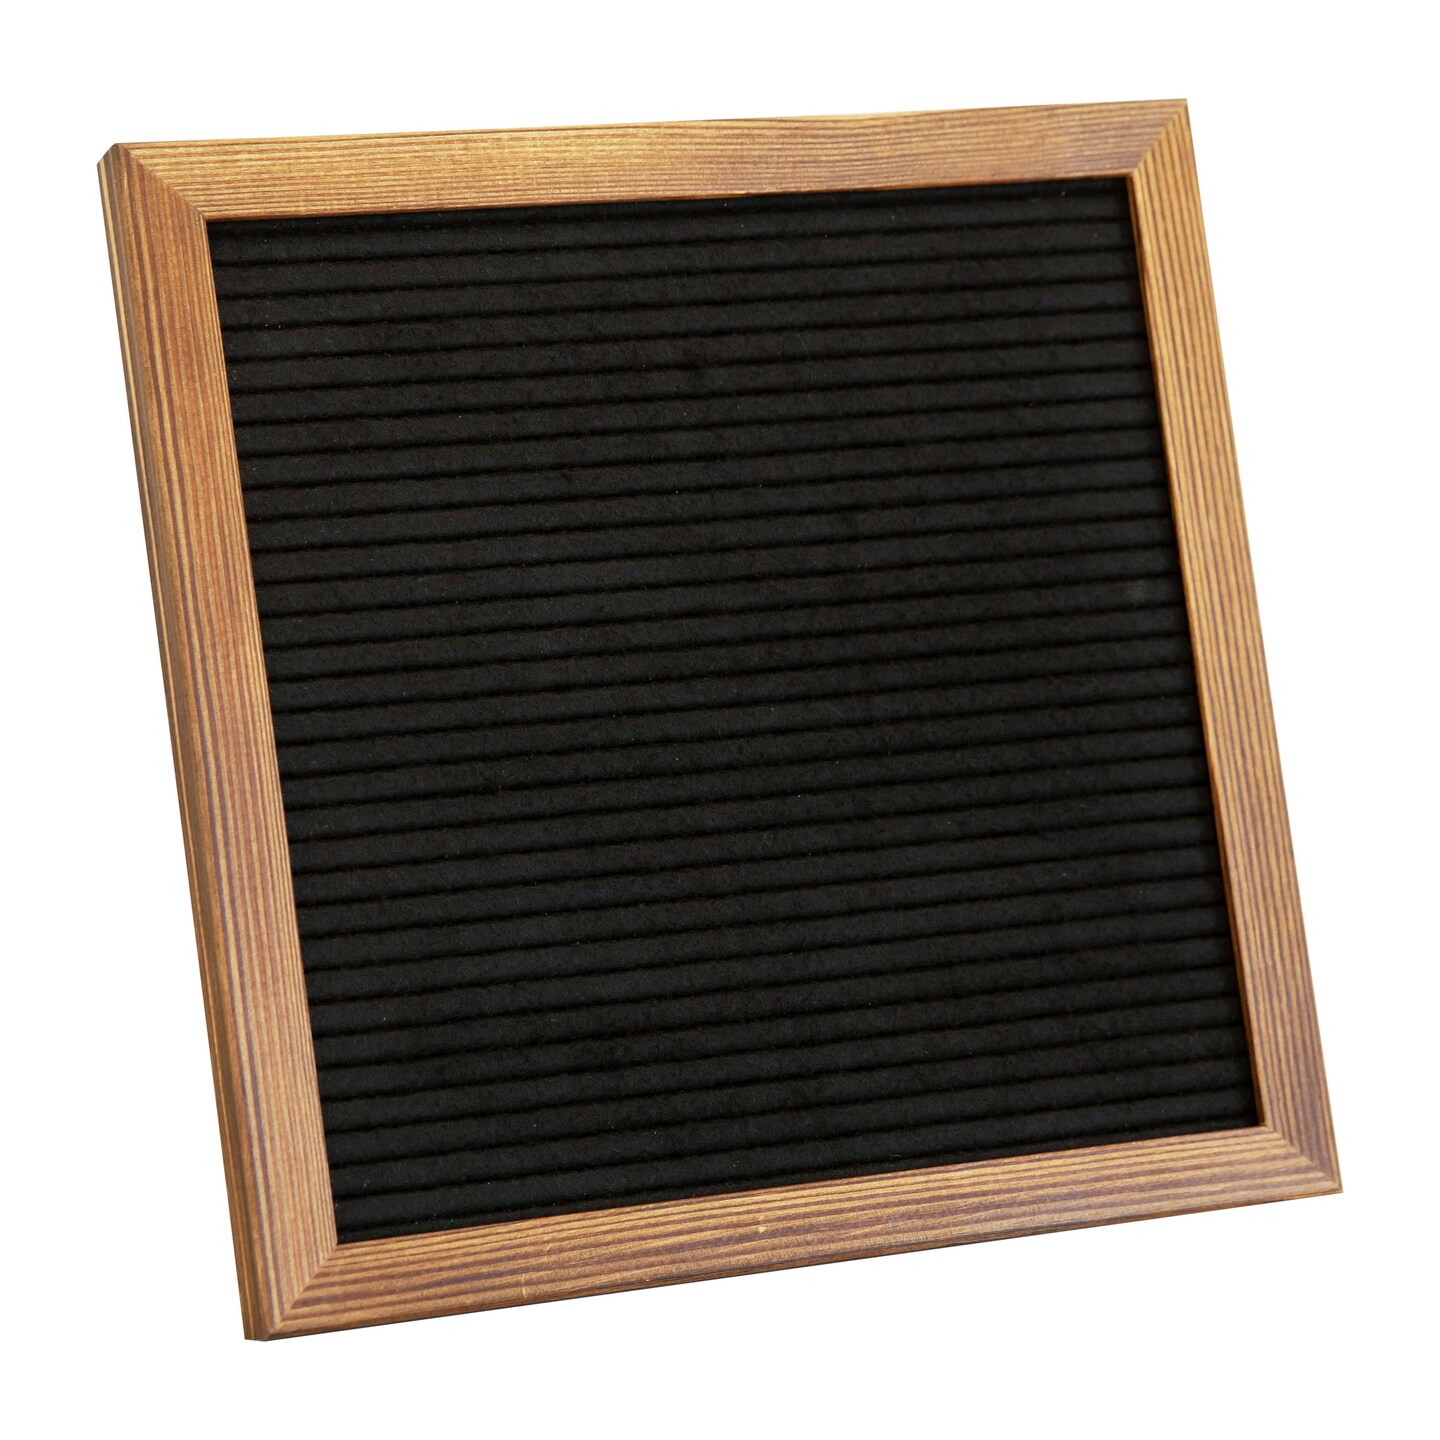 Merrick Lane Bellamy Wood Letter Board Set with Felt Facing, 389 Letters Including Numbers, Symbols, Icons and a Canvas Carrying Case